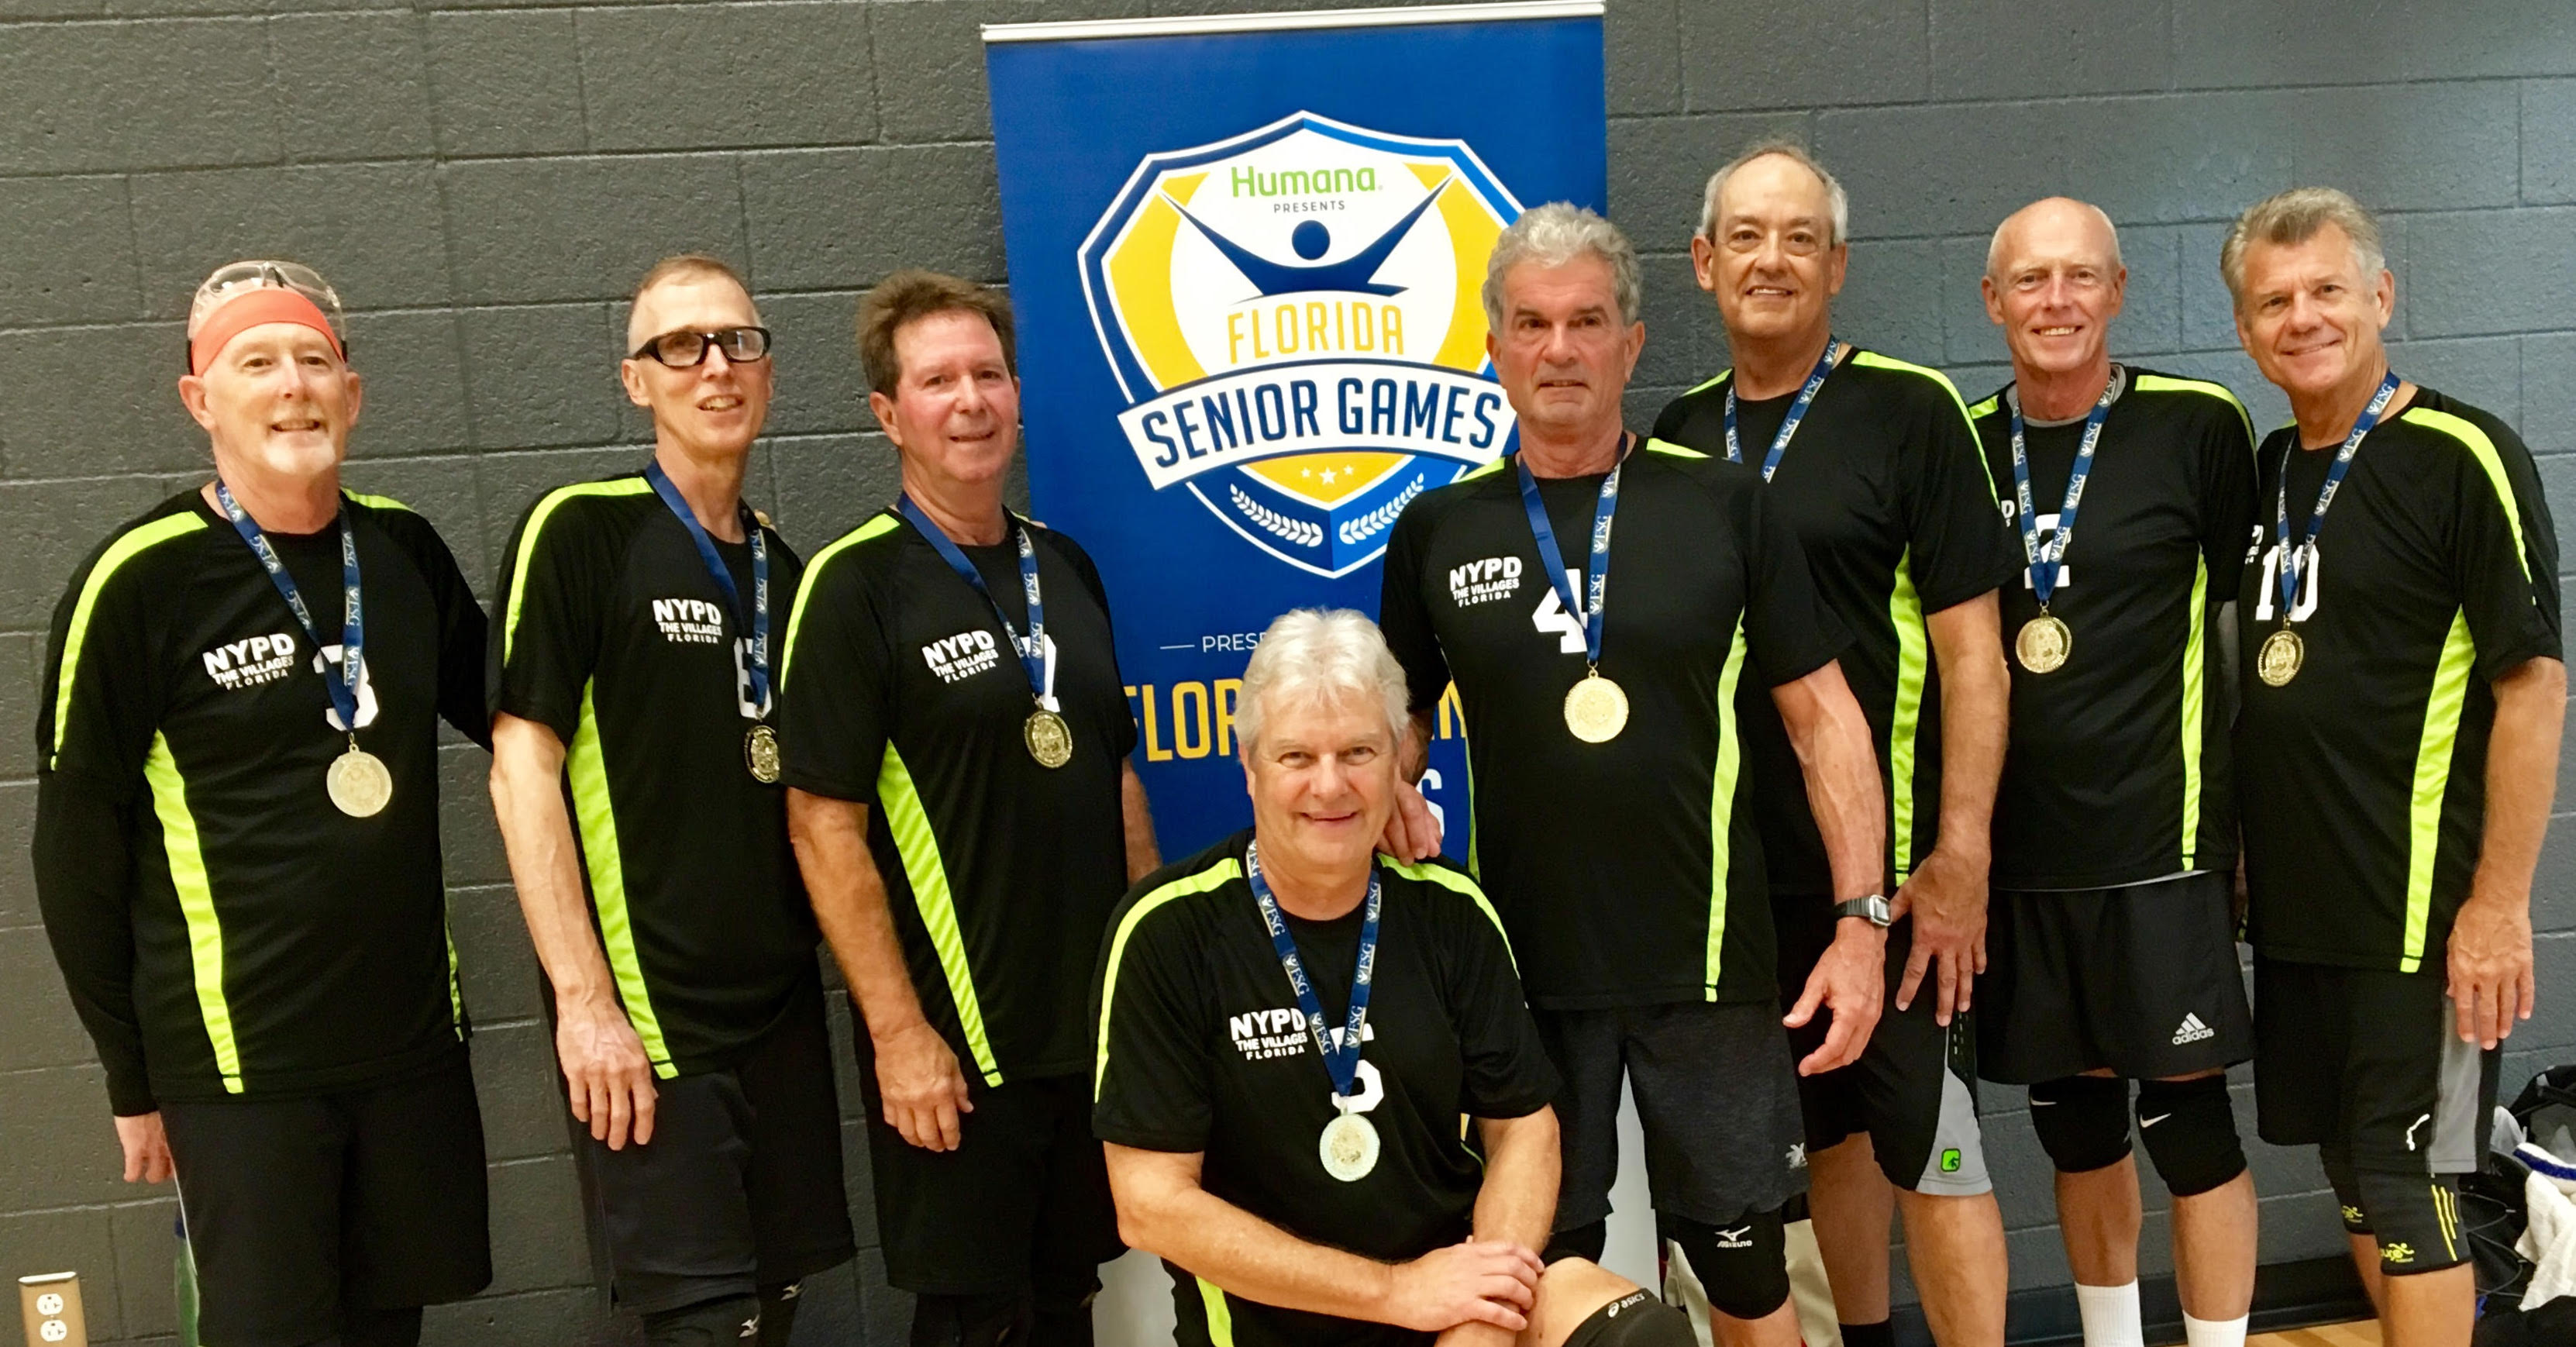 Villagers pick up gold, silver medals at Florida Senior Games